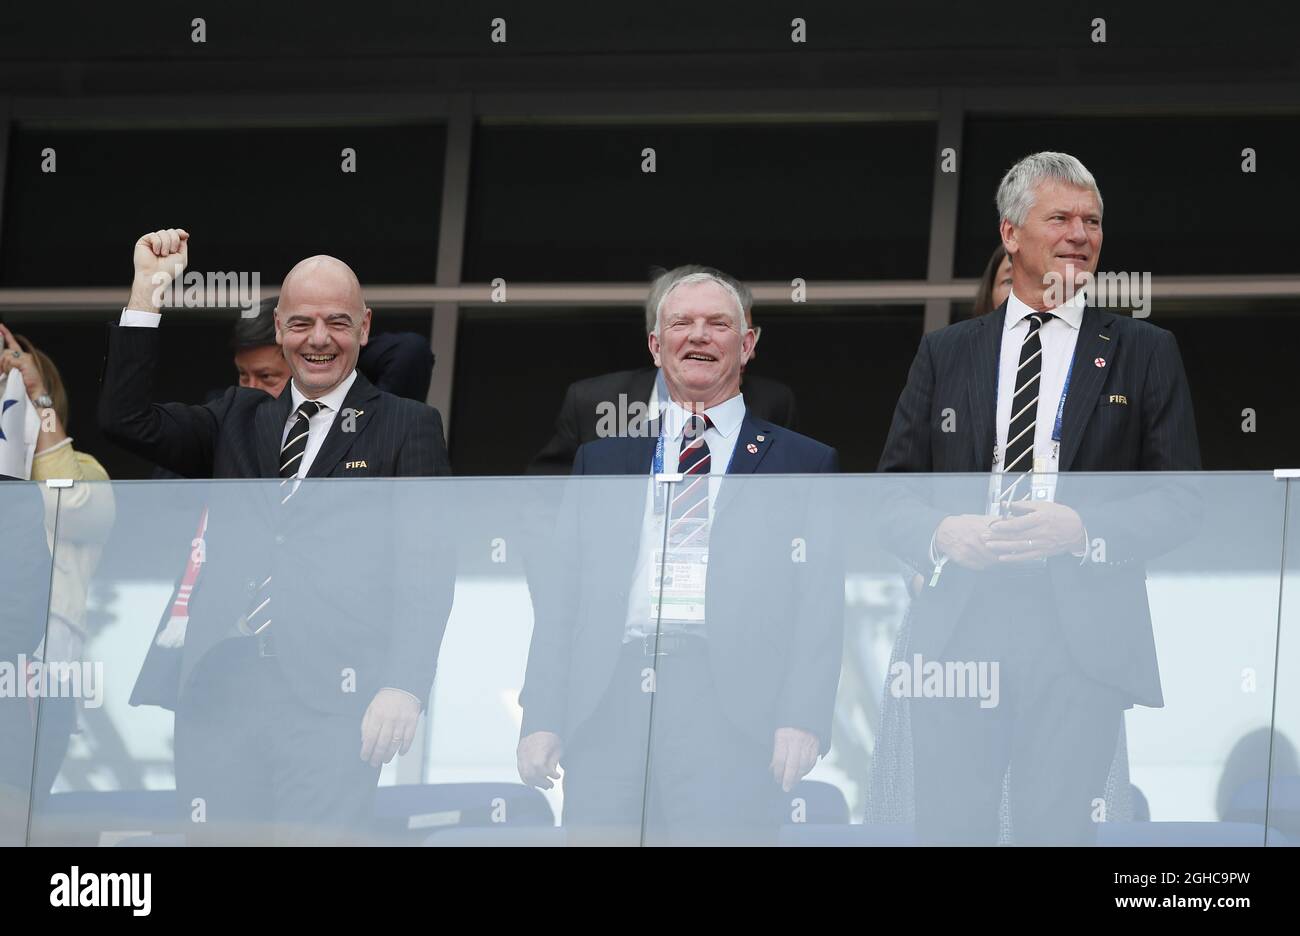 FIFA president Gianni Infantino, Greg Clarke and Martin Edwards during the FIFA World Cup 2018 Group G match at the Nizhny Novgorod Stadium, Nizhny Novgorod. Picture date 24th June 2018. Picture credit should read: David Klein/Sportimage via PA Images Stock Photo